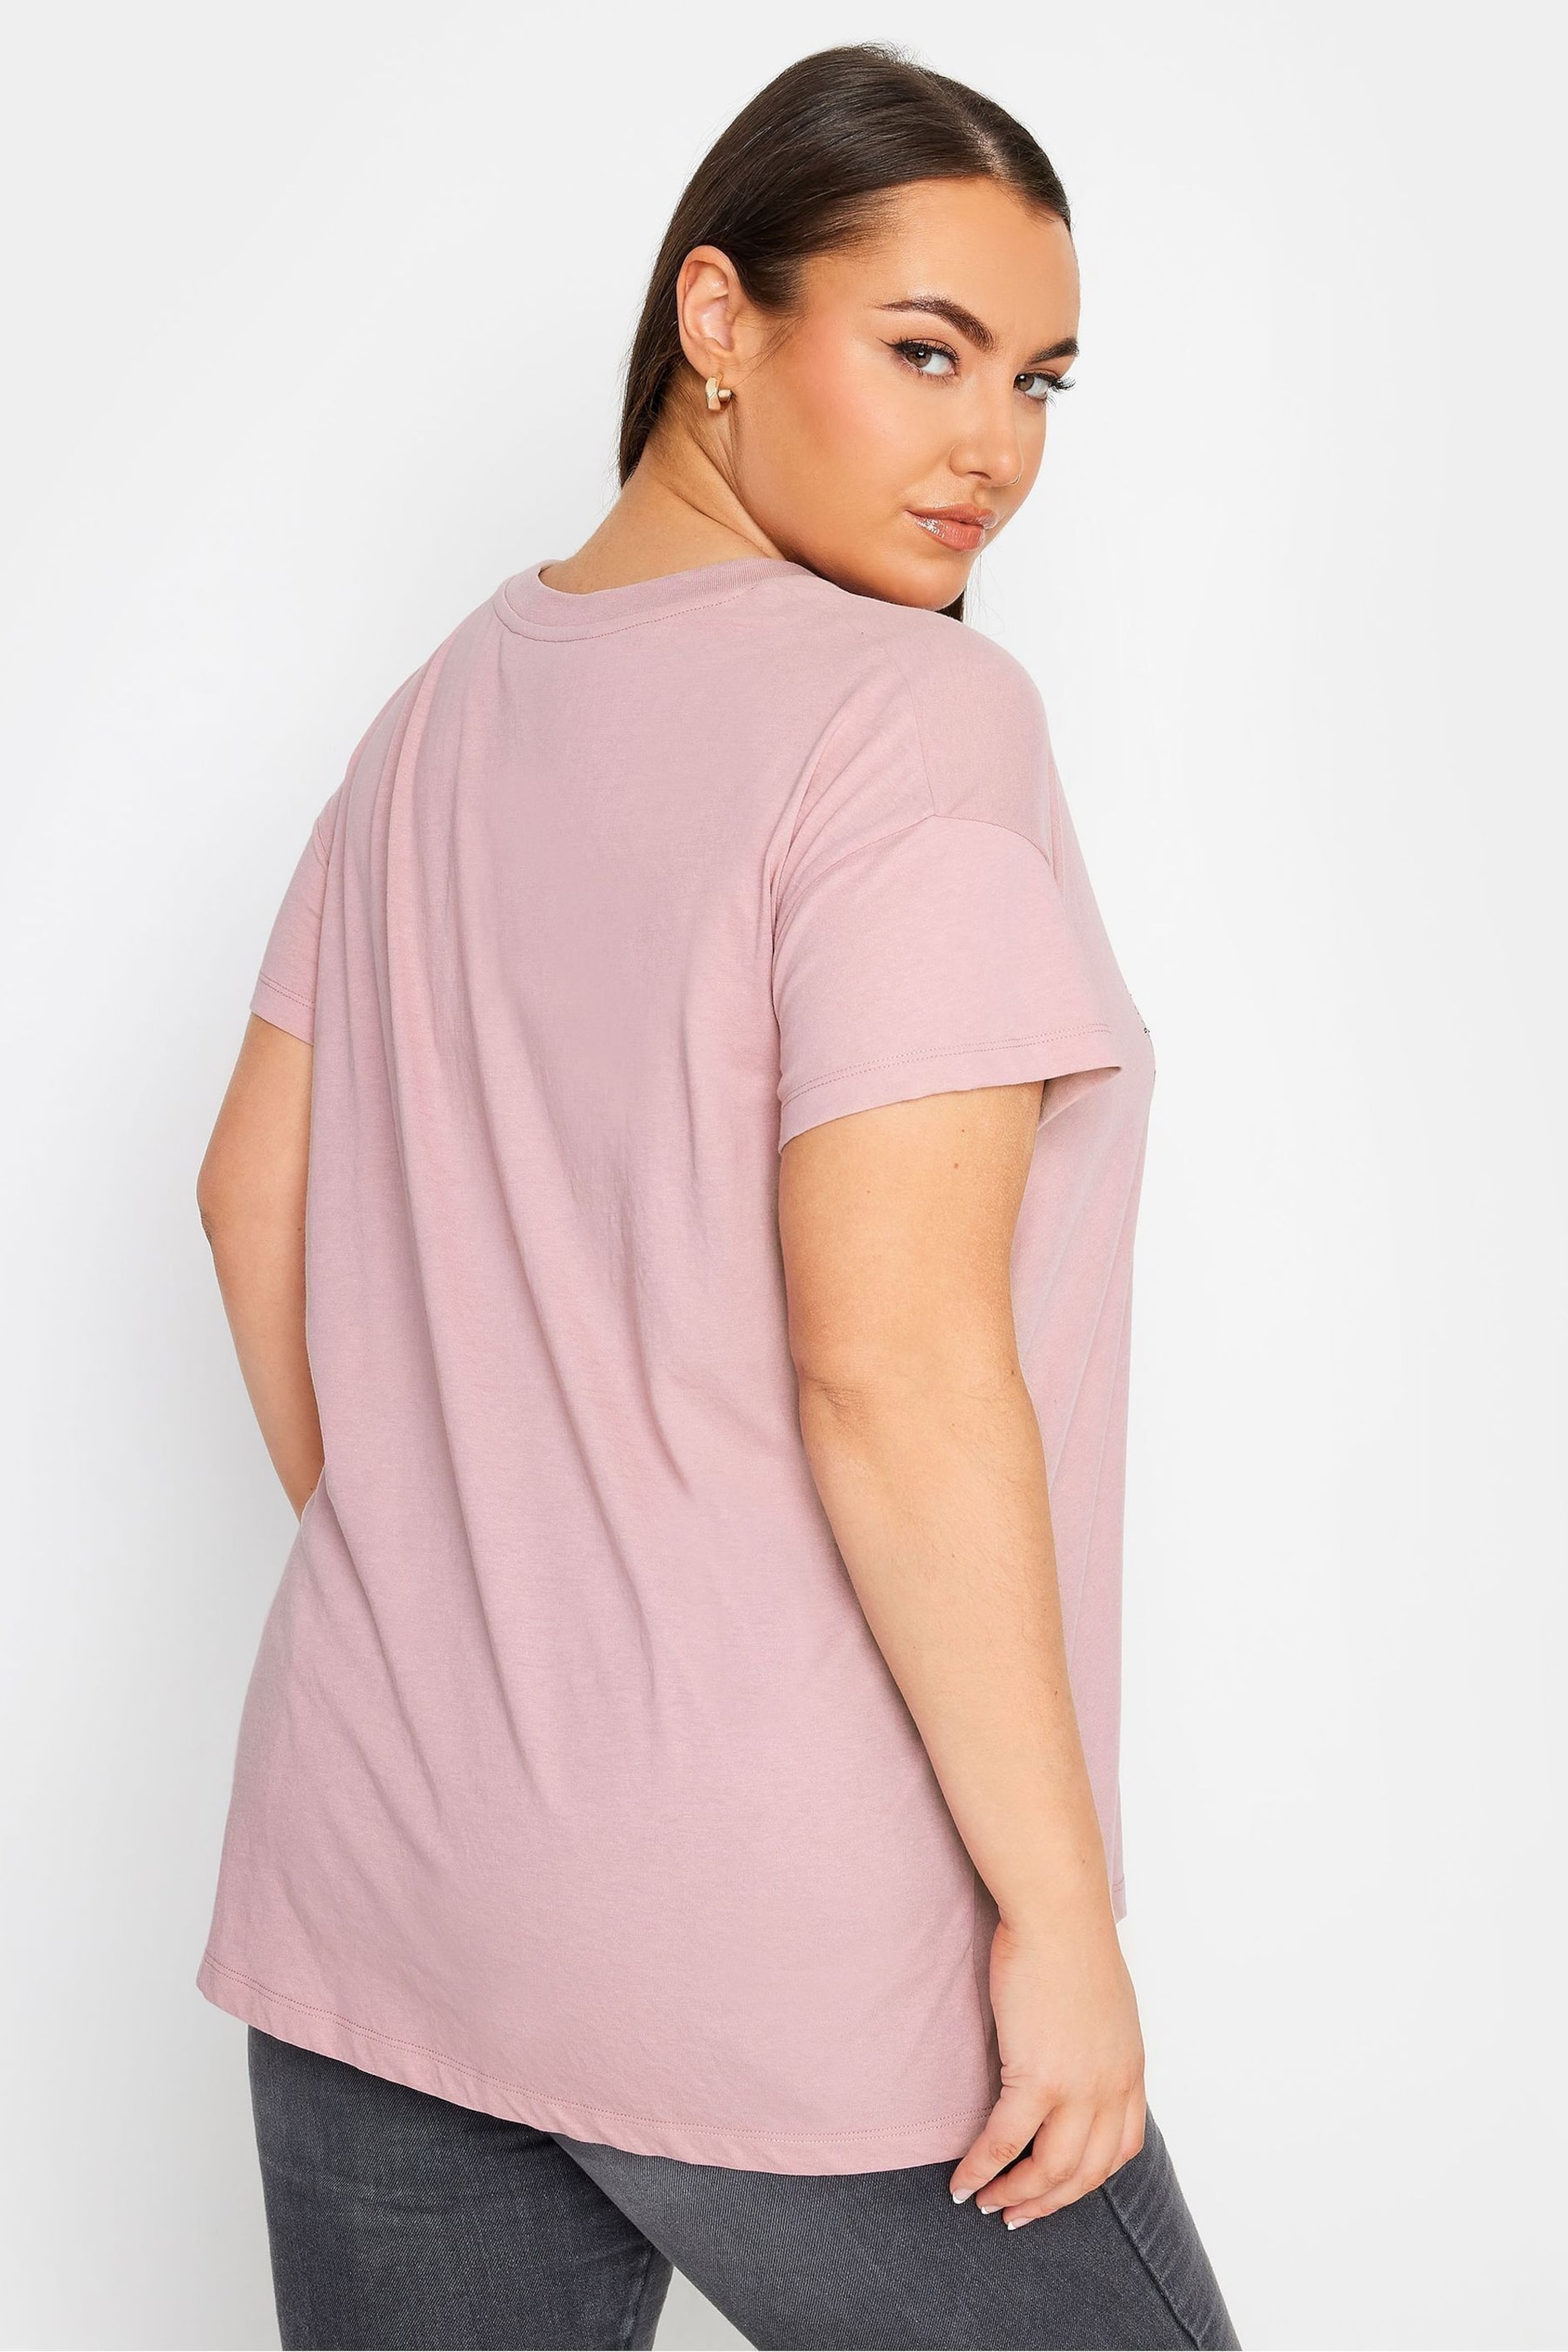 Yours Curve Pink Placement Print T-Shirt - Image 3 of 4